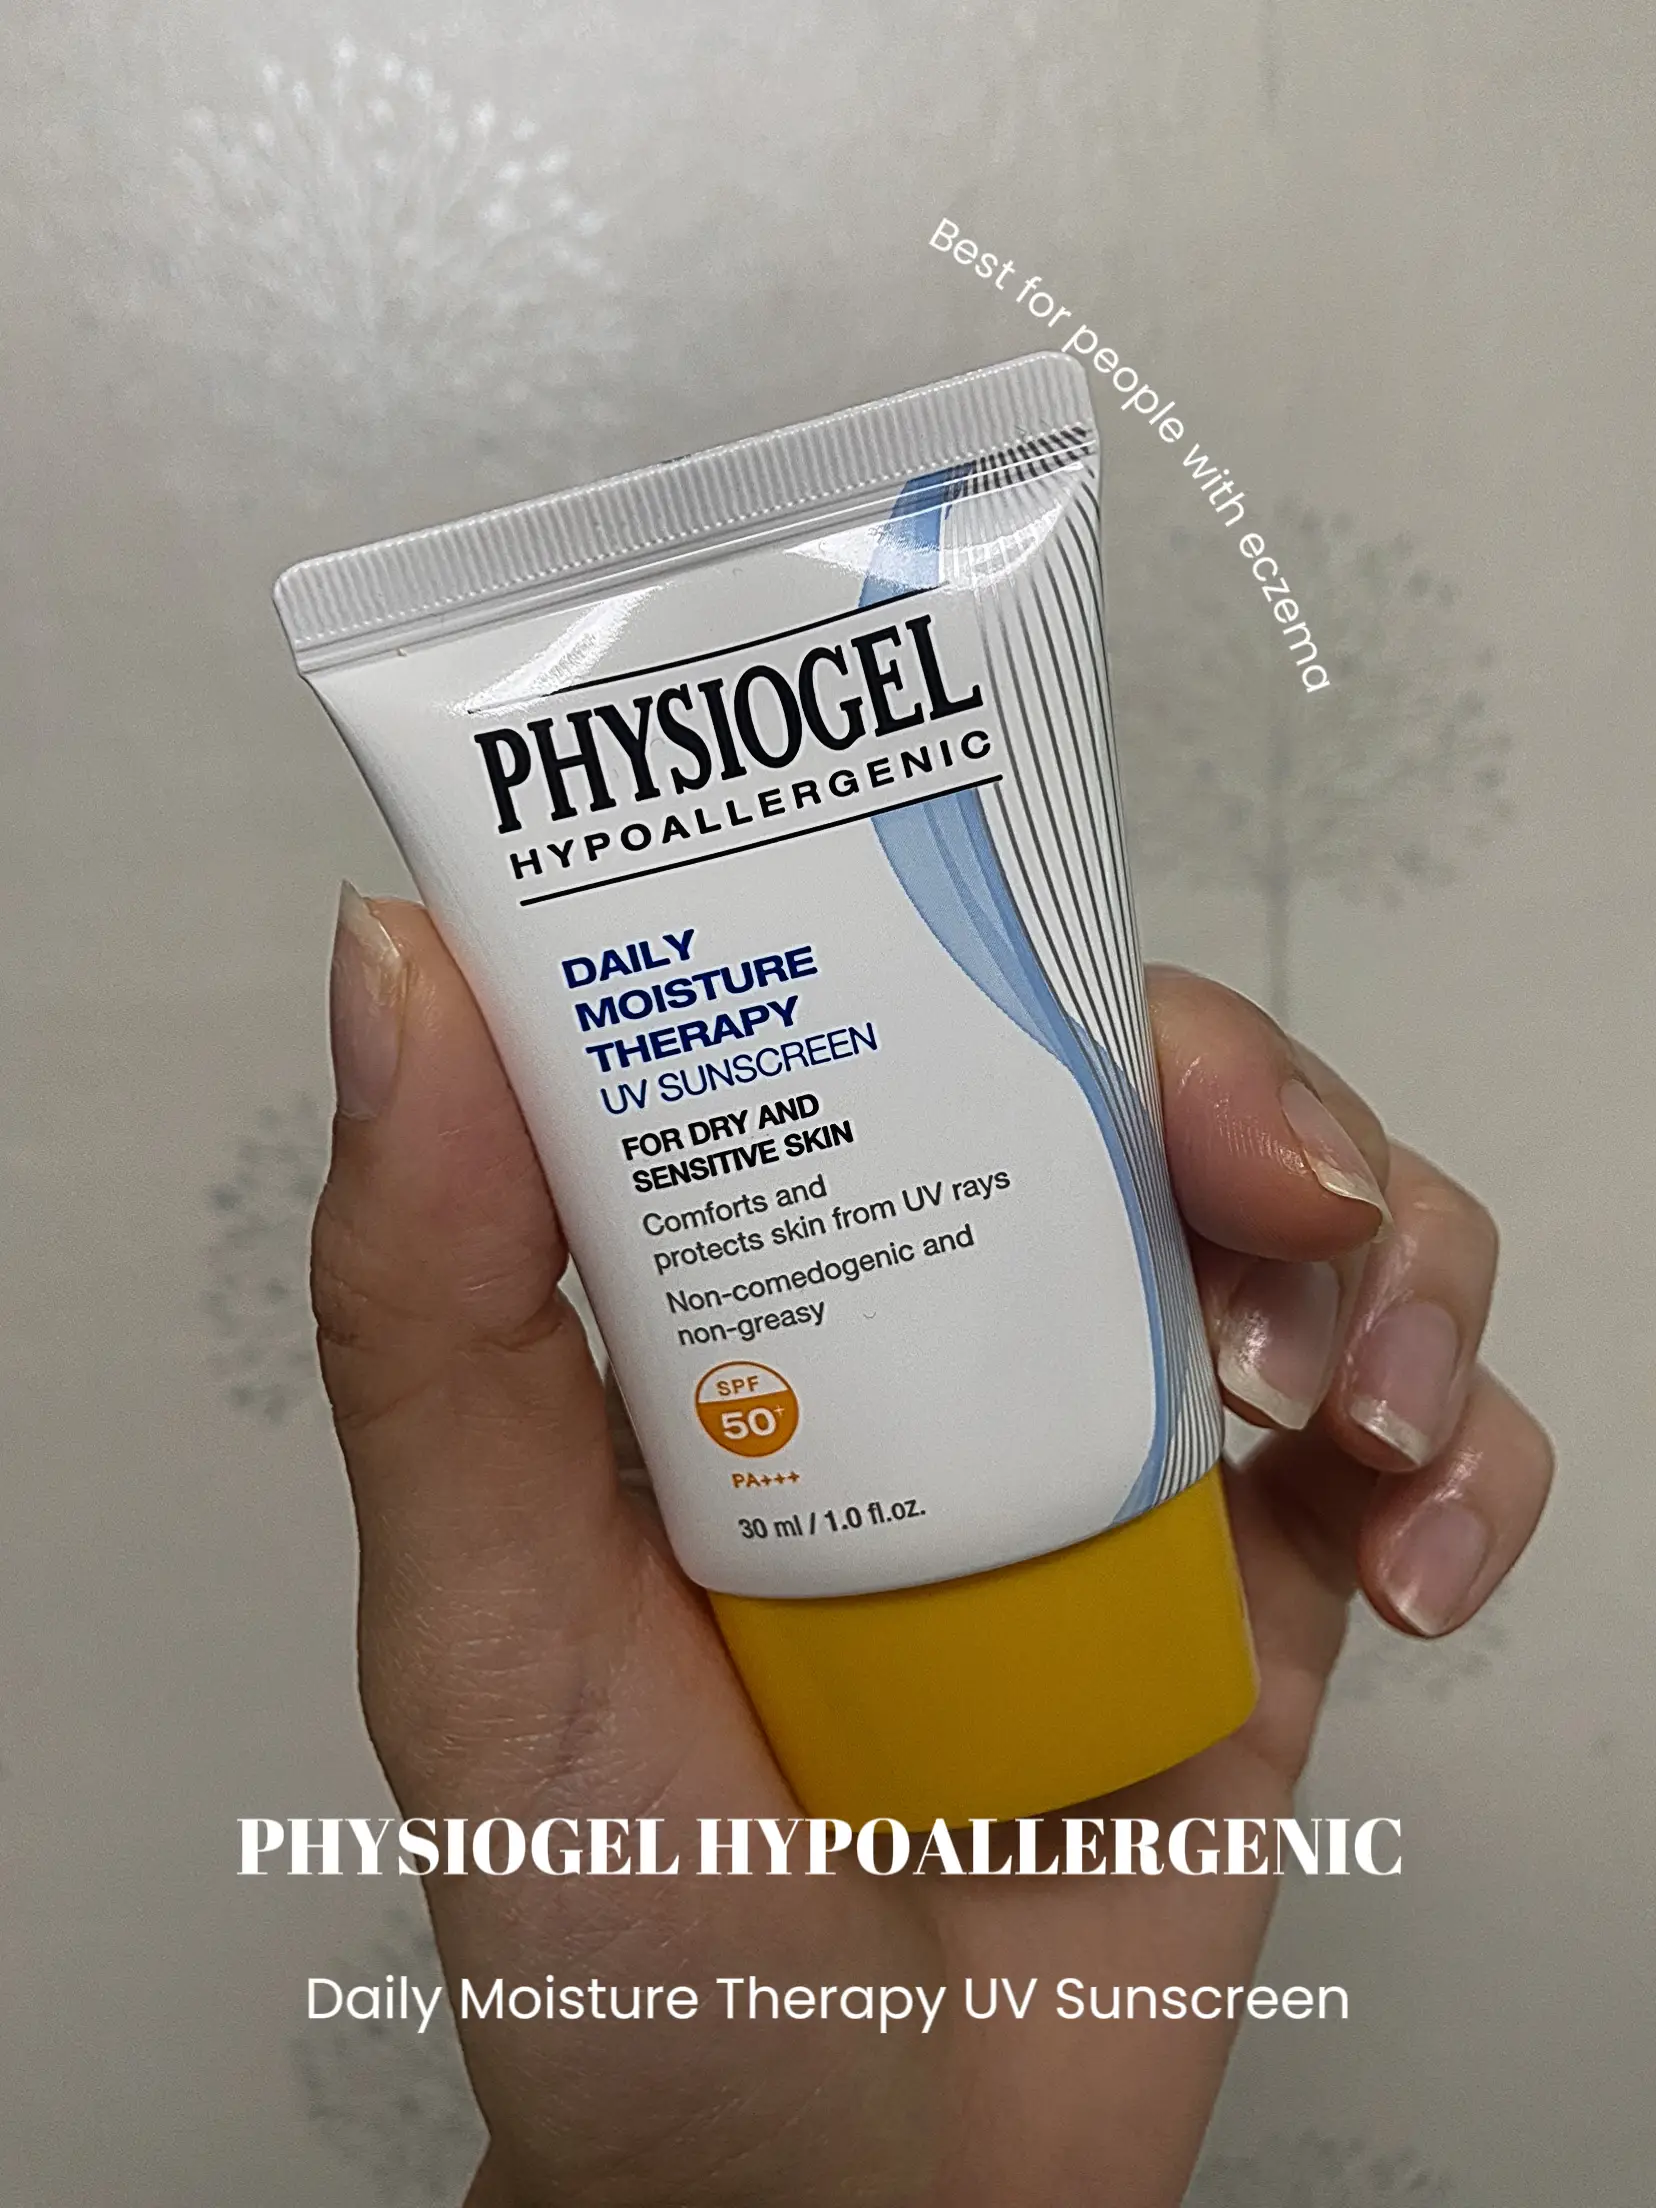 PHYSIOGEL HYPOALLERGENIC 's images(0)